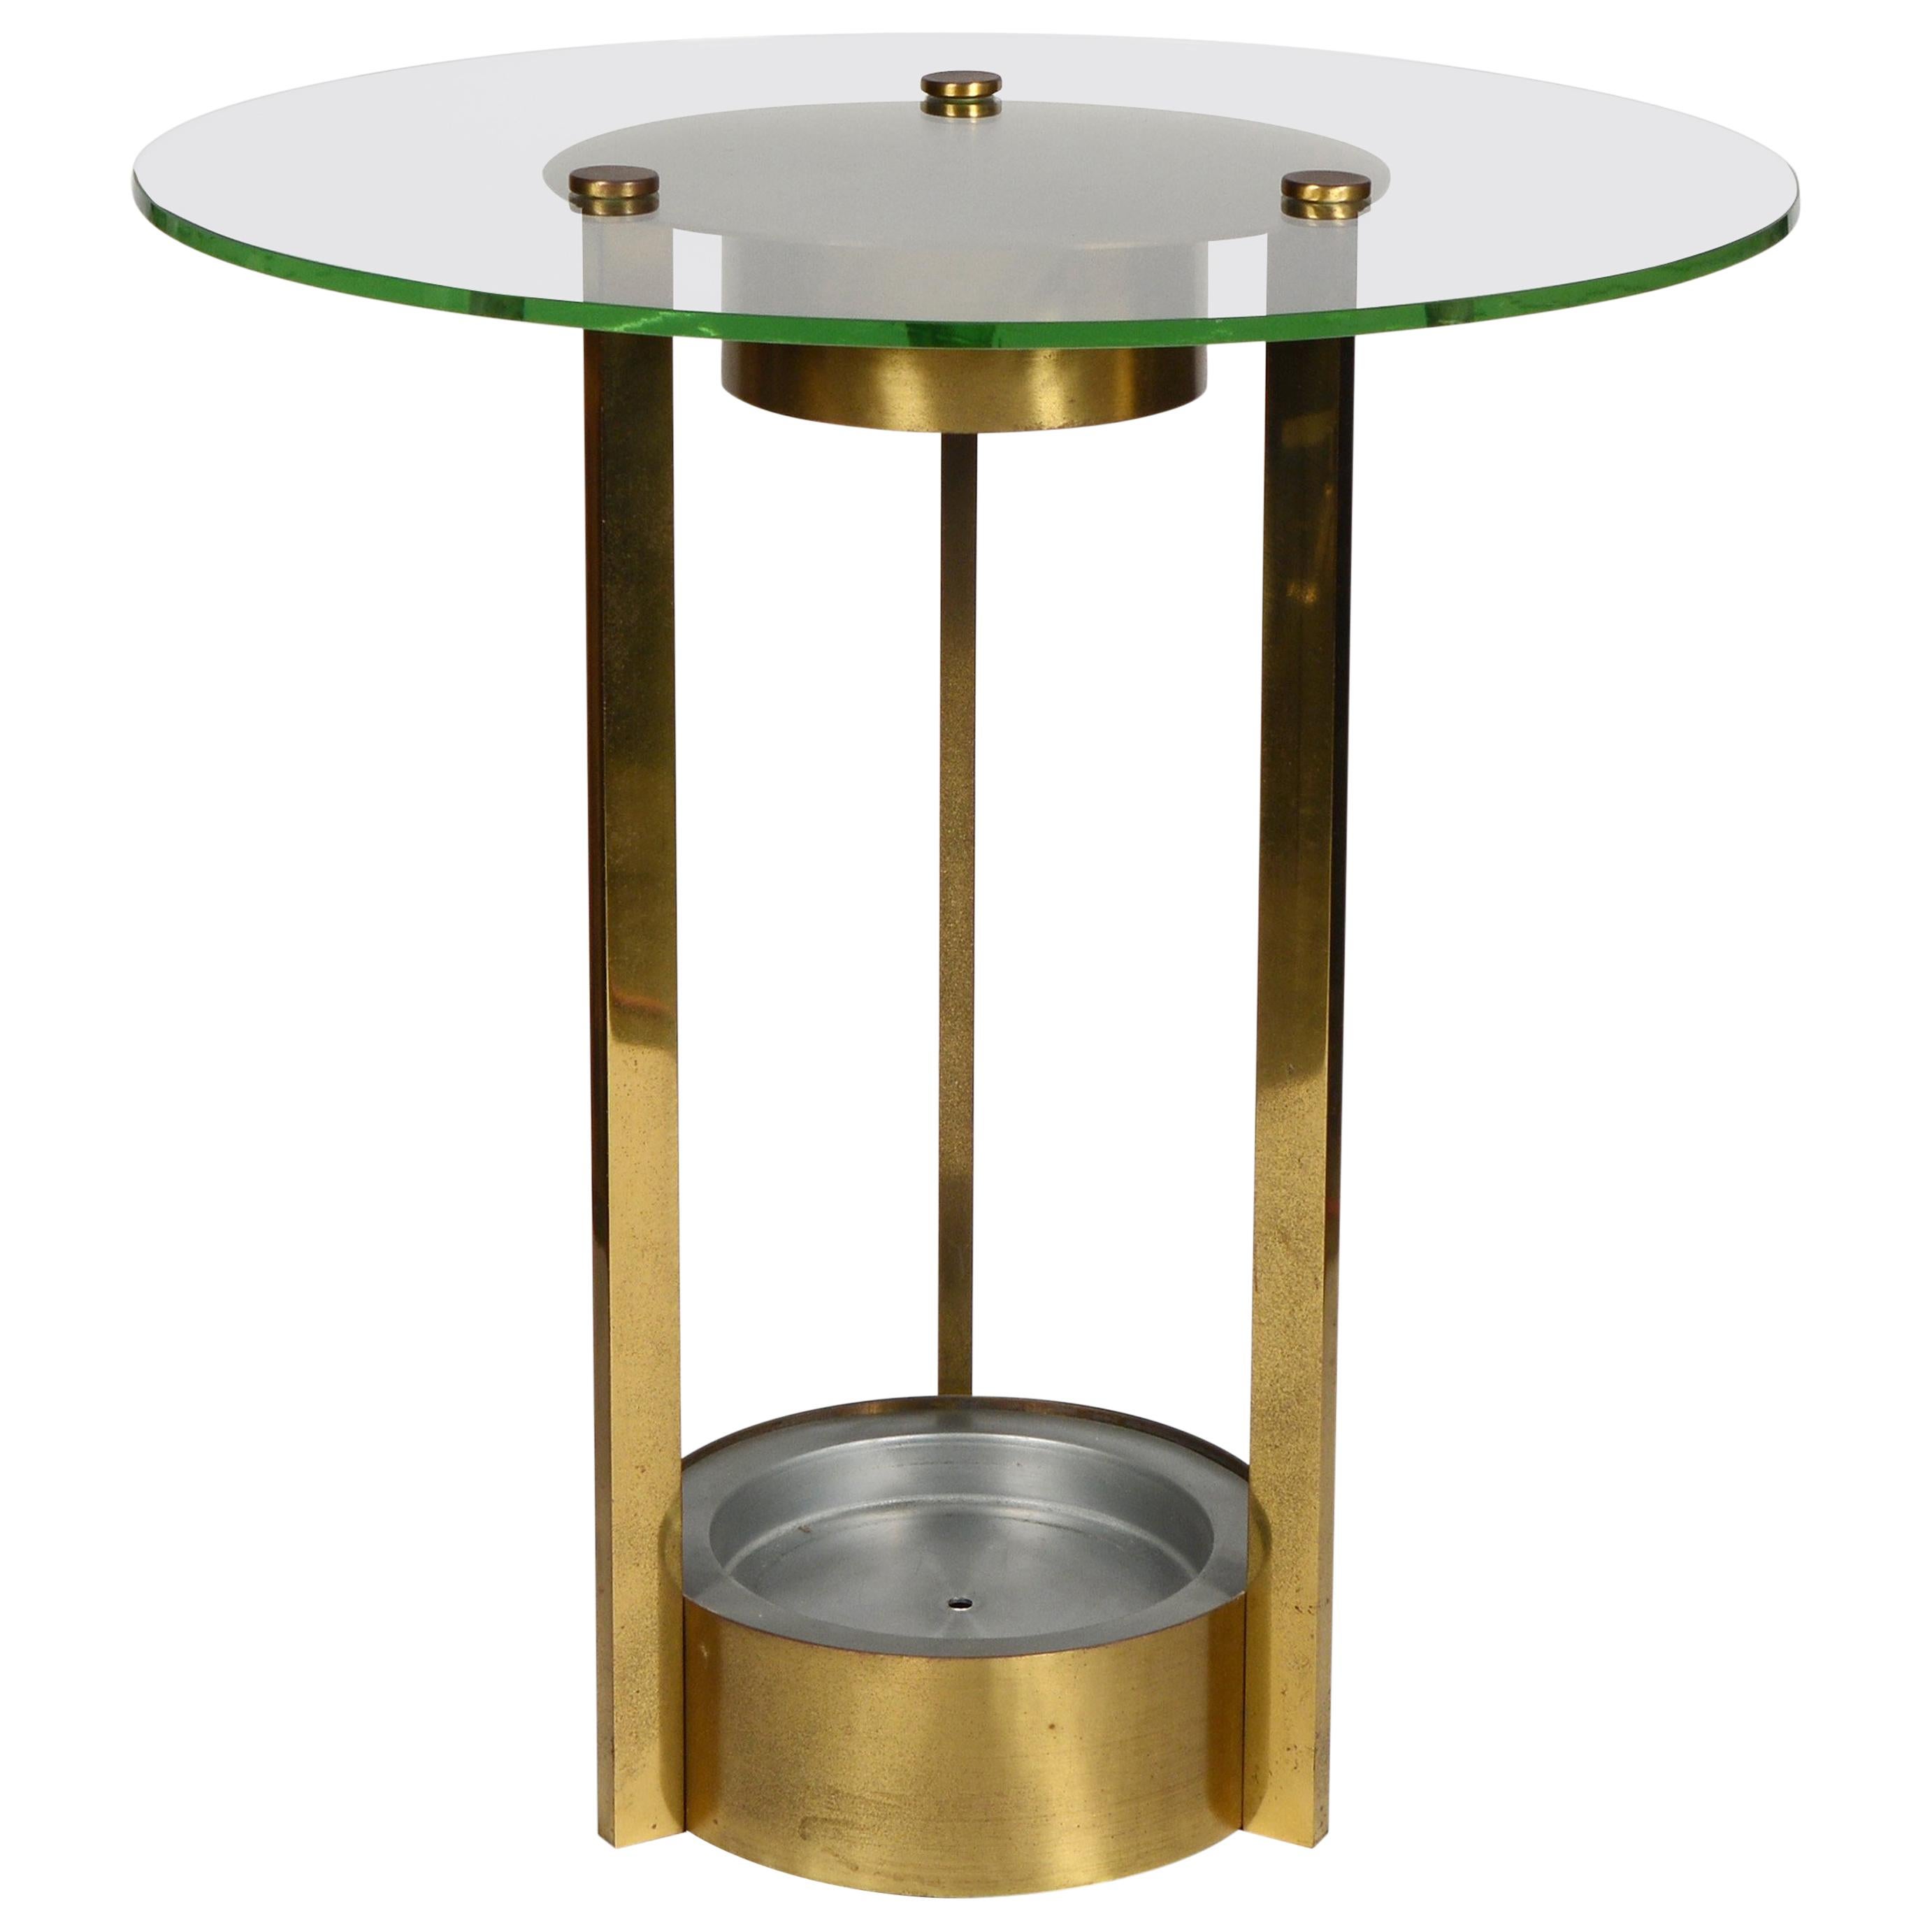 Brass and Glass Illuminated Art Deco Side Table Attributed to Dorothy Thorpe